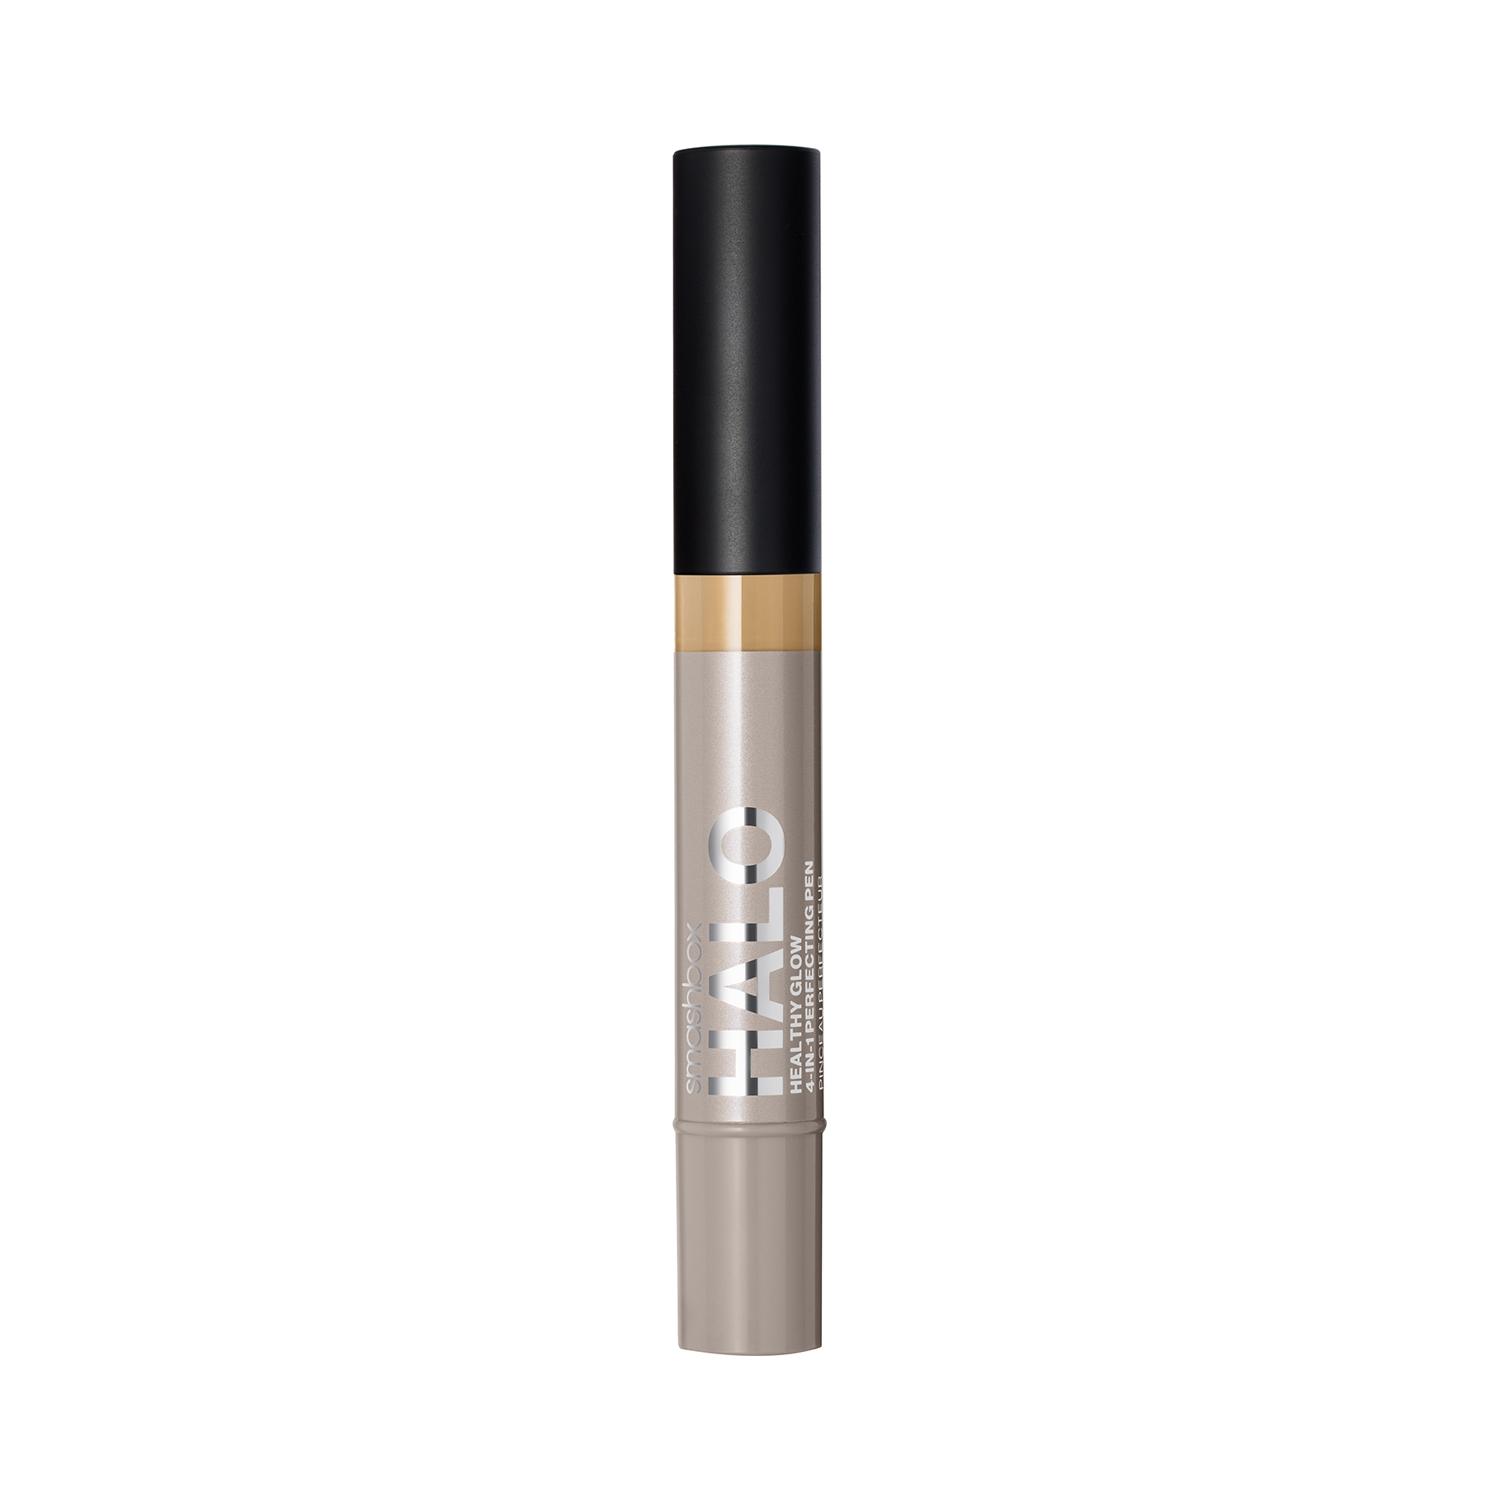 smashbox halo healthy glow 4-in-1 perfecting concealer pen - l20o (3.5ml)